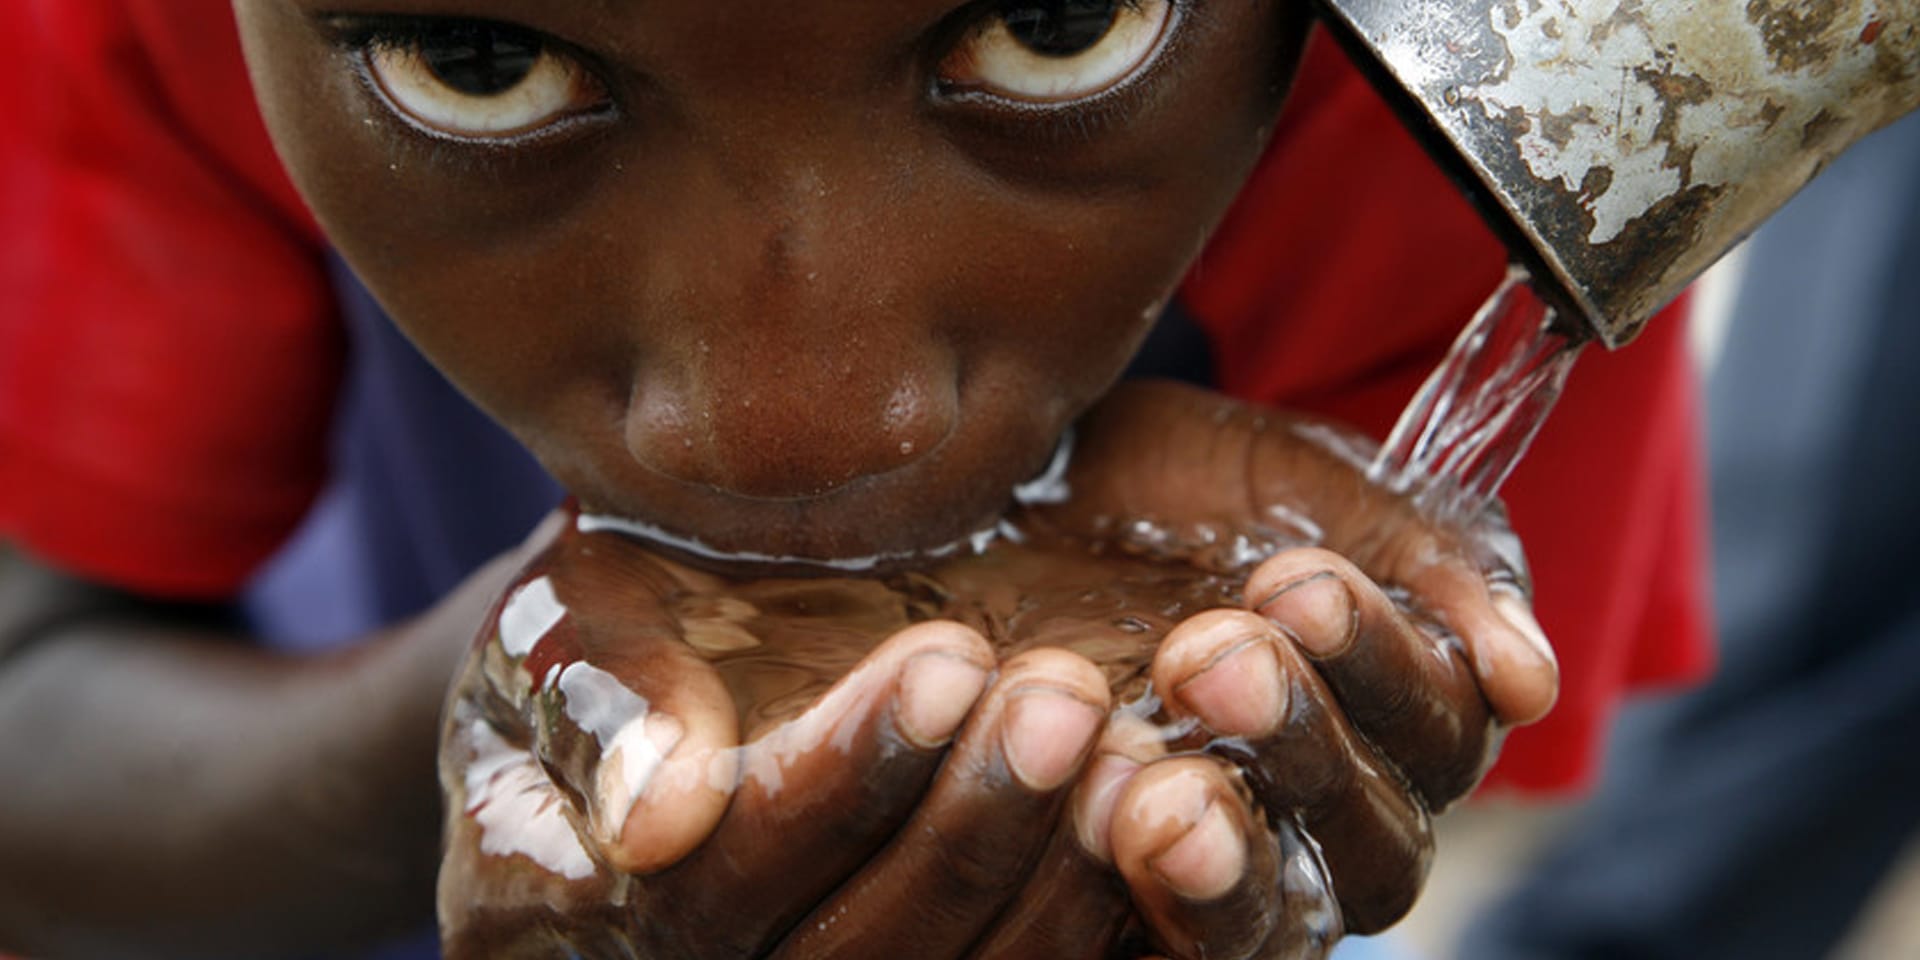 Close-up image of a young boy drinking water pouring into his hands from a waterspout.